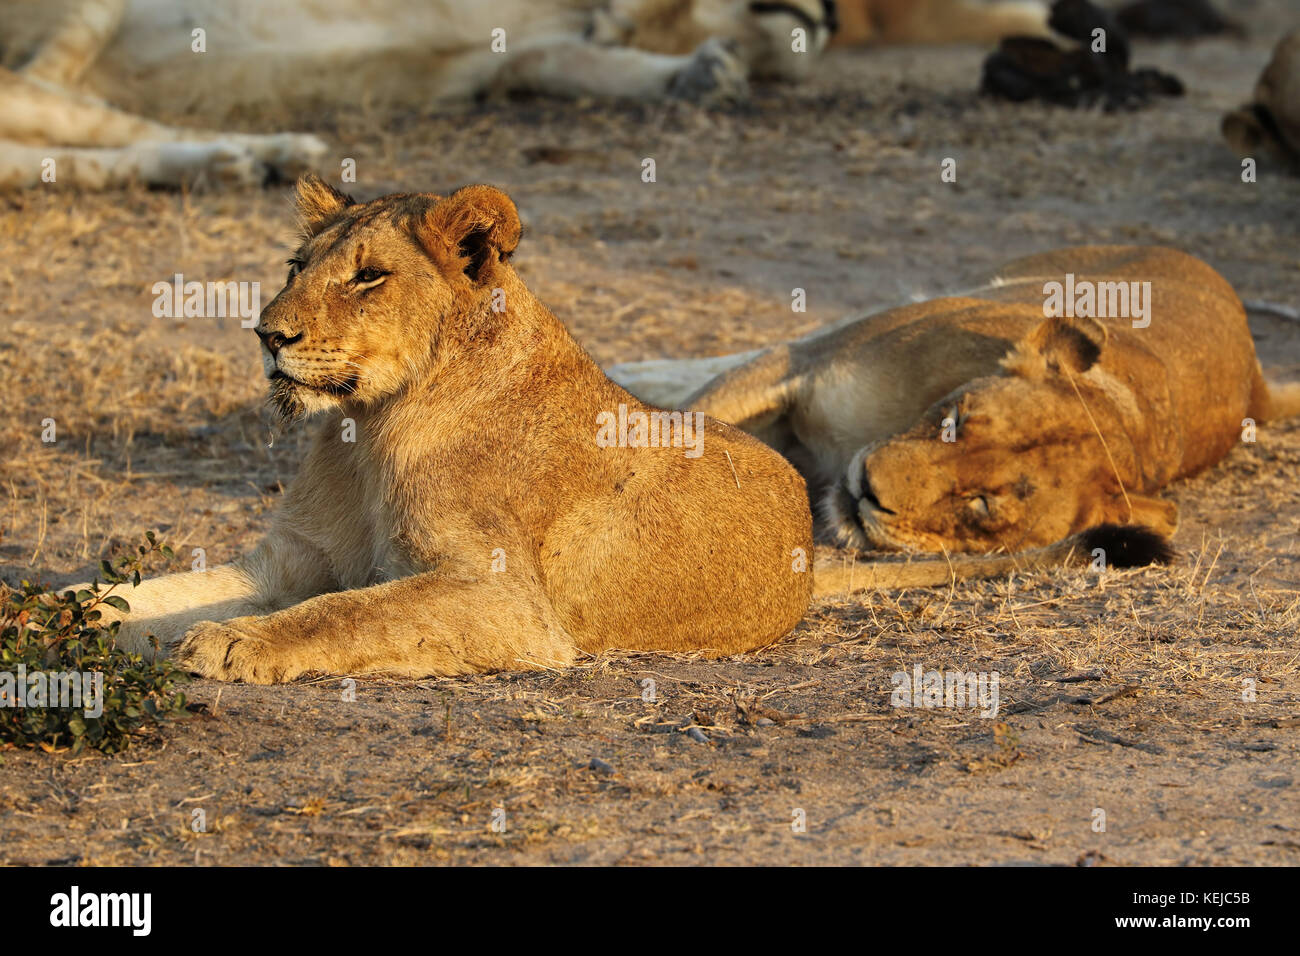 Close up of lion in the Kruger National Park, South Africa Stock Photo